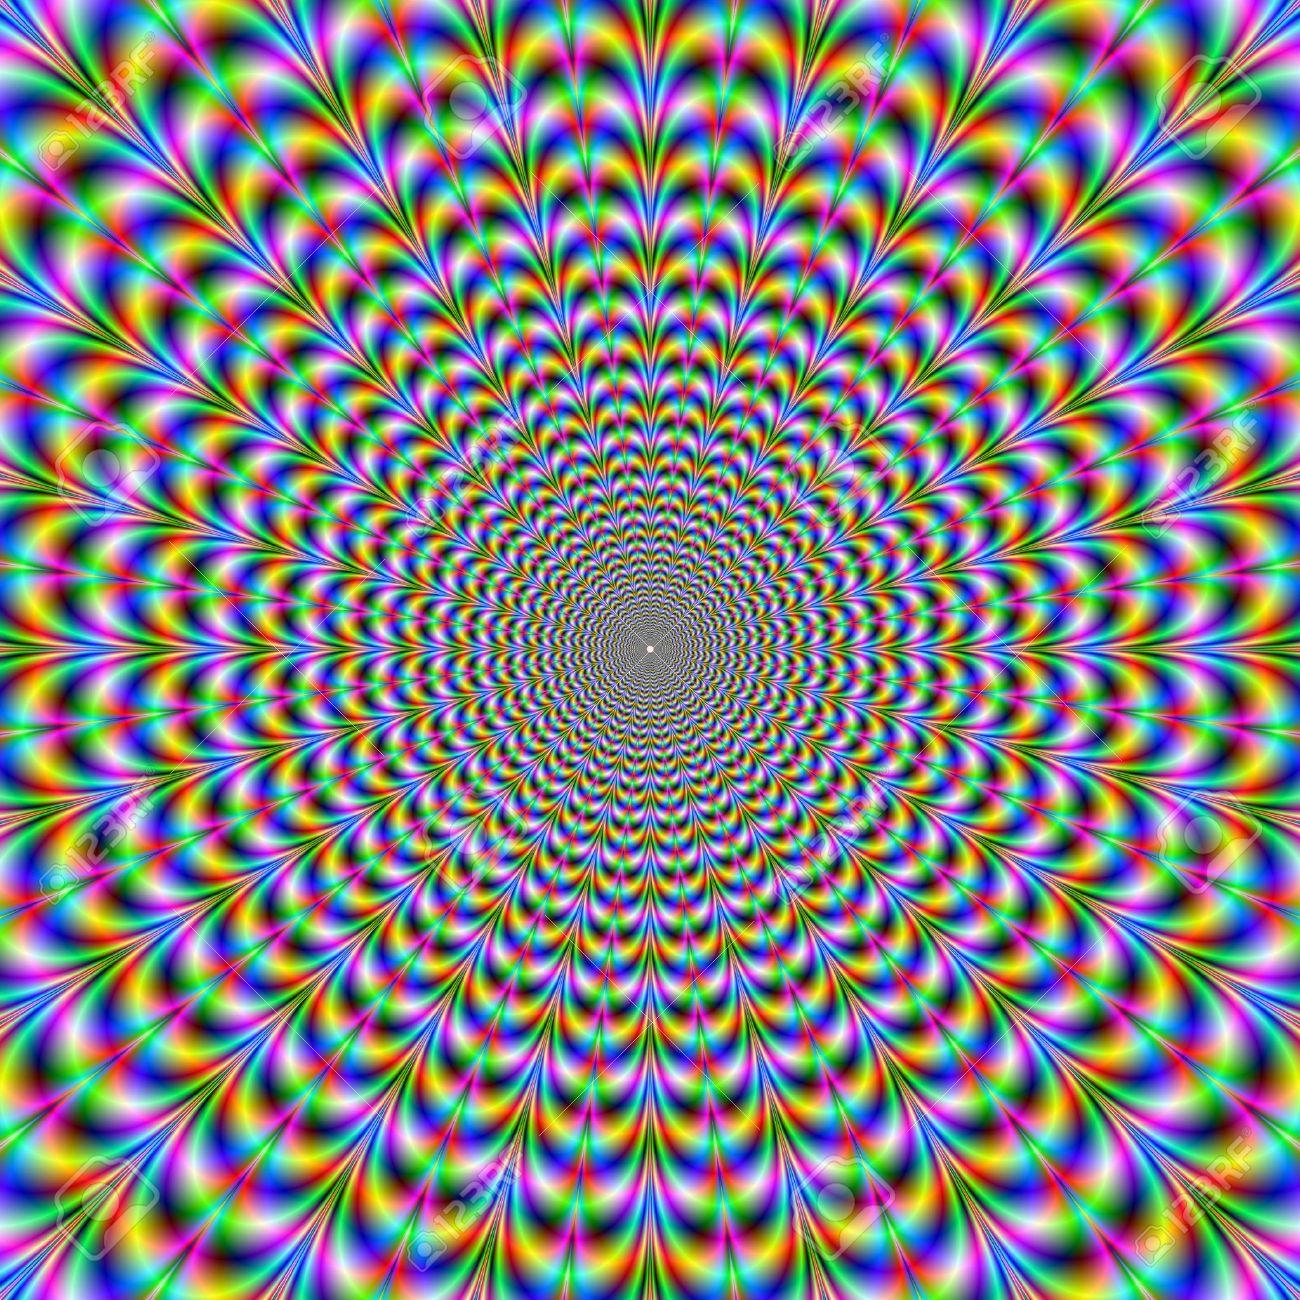 You are currently viewing Exploring Digitized Optical Illusions: Design that Messes with our Minds